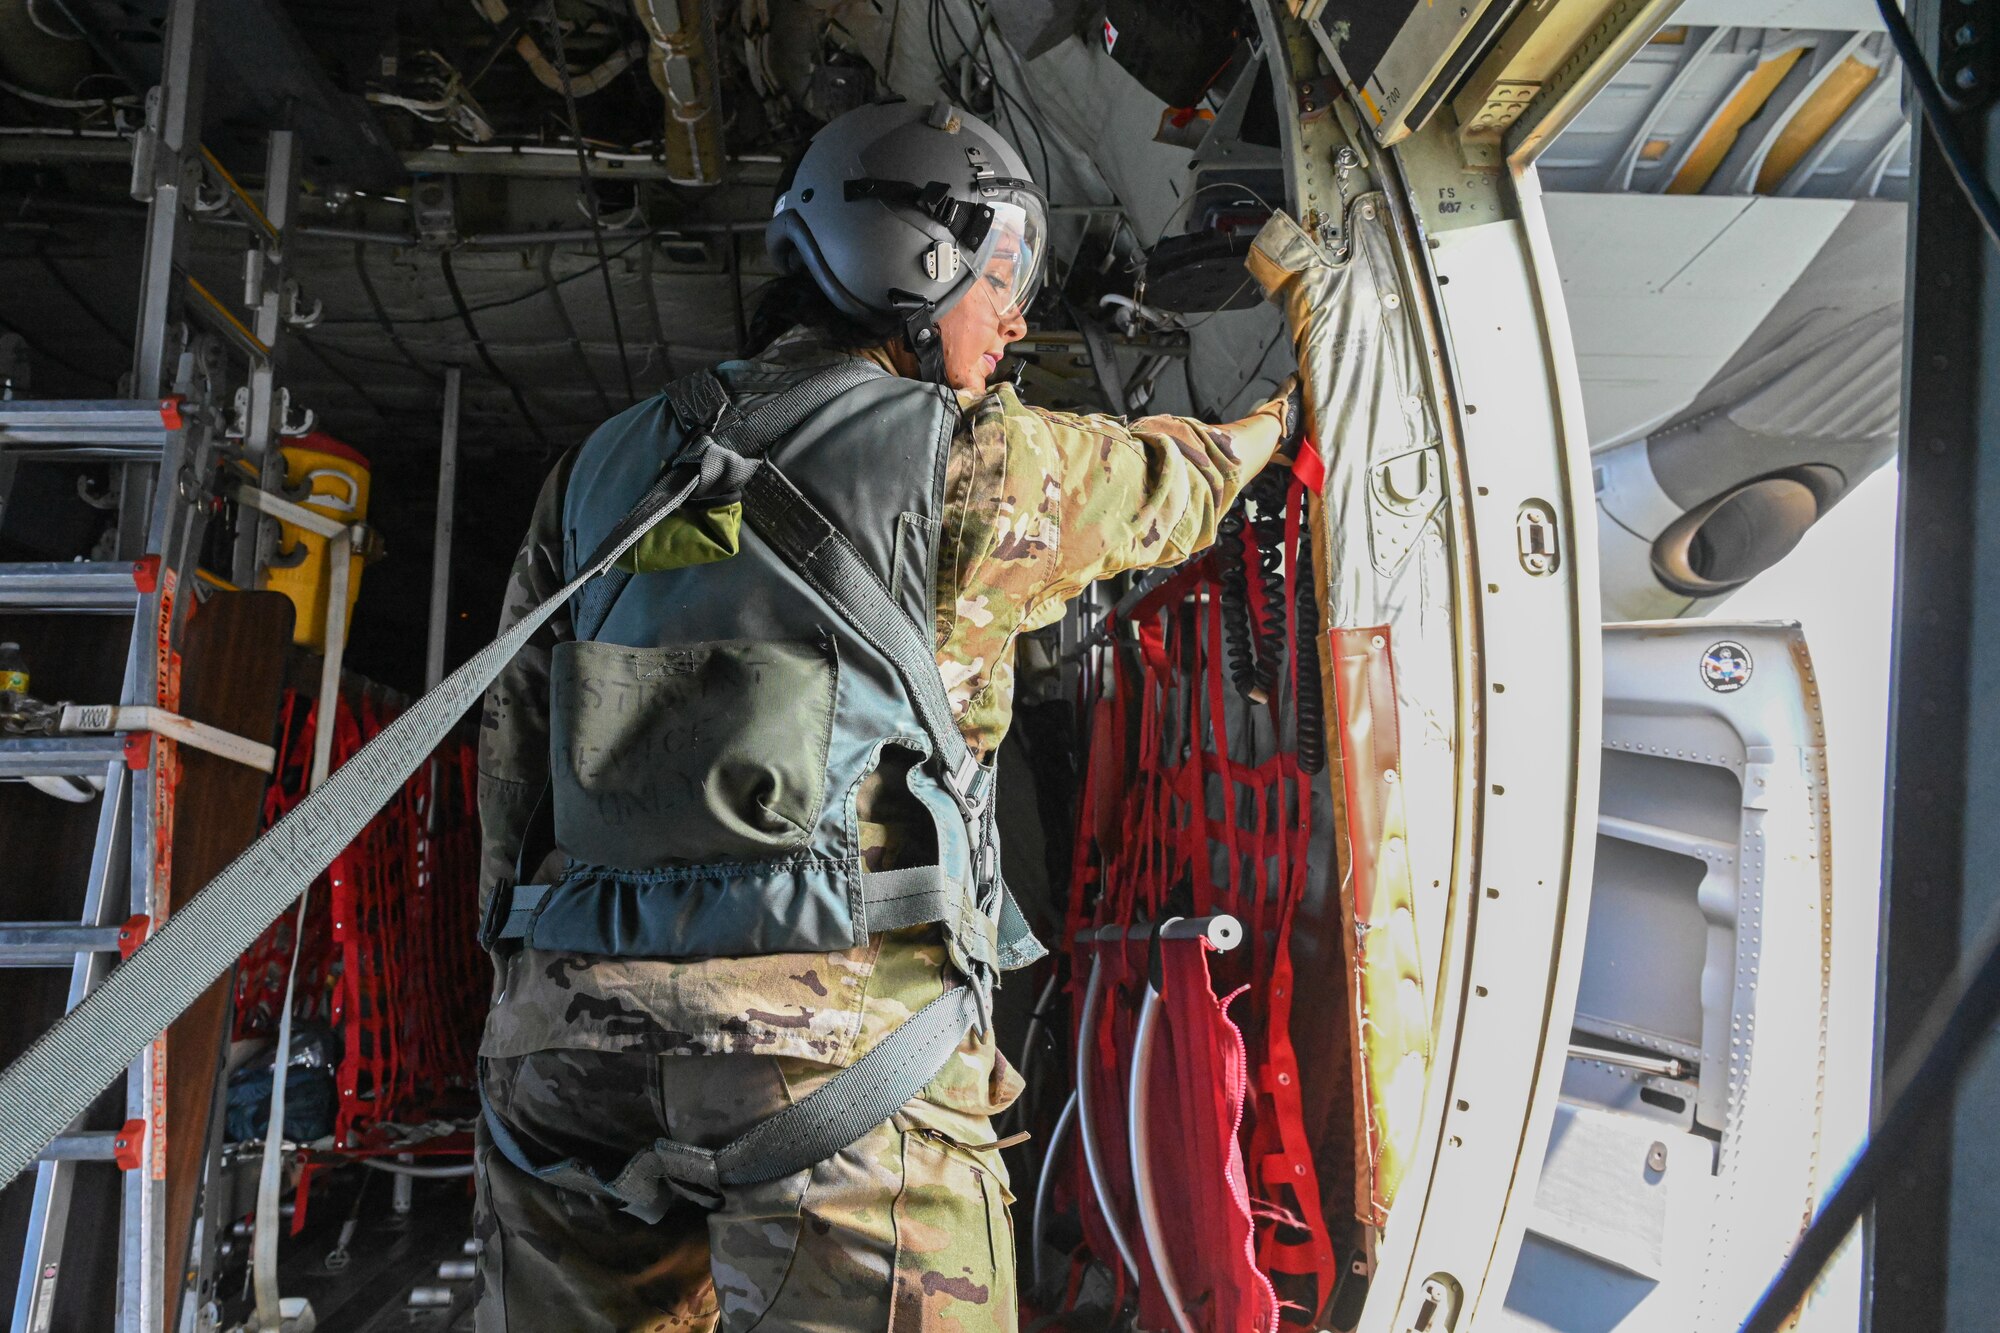 Loadmaster sees the view from a flying plane.